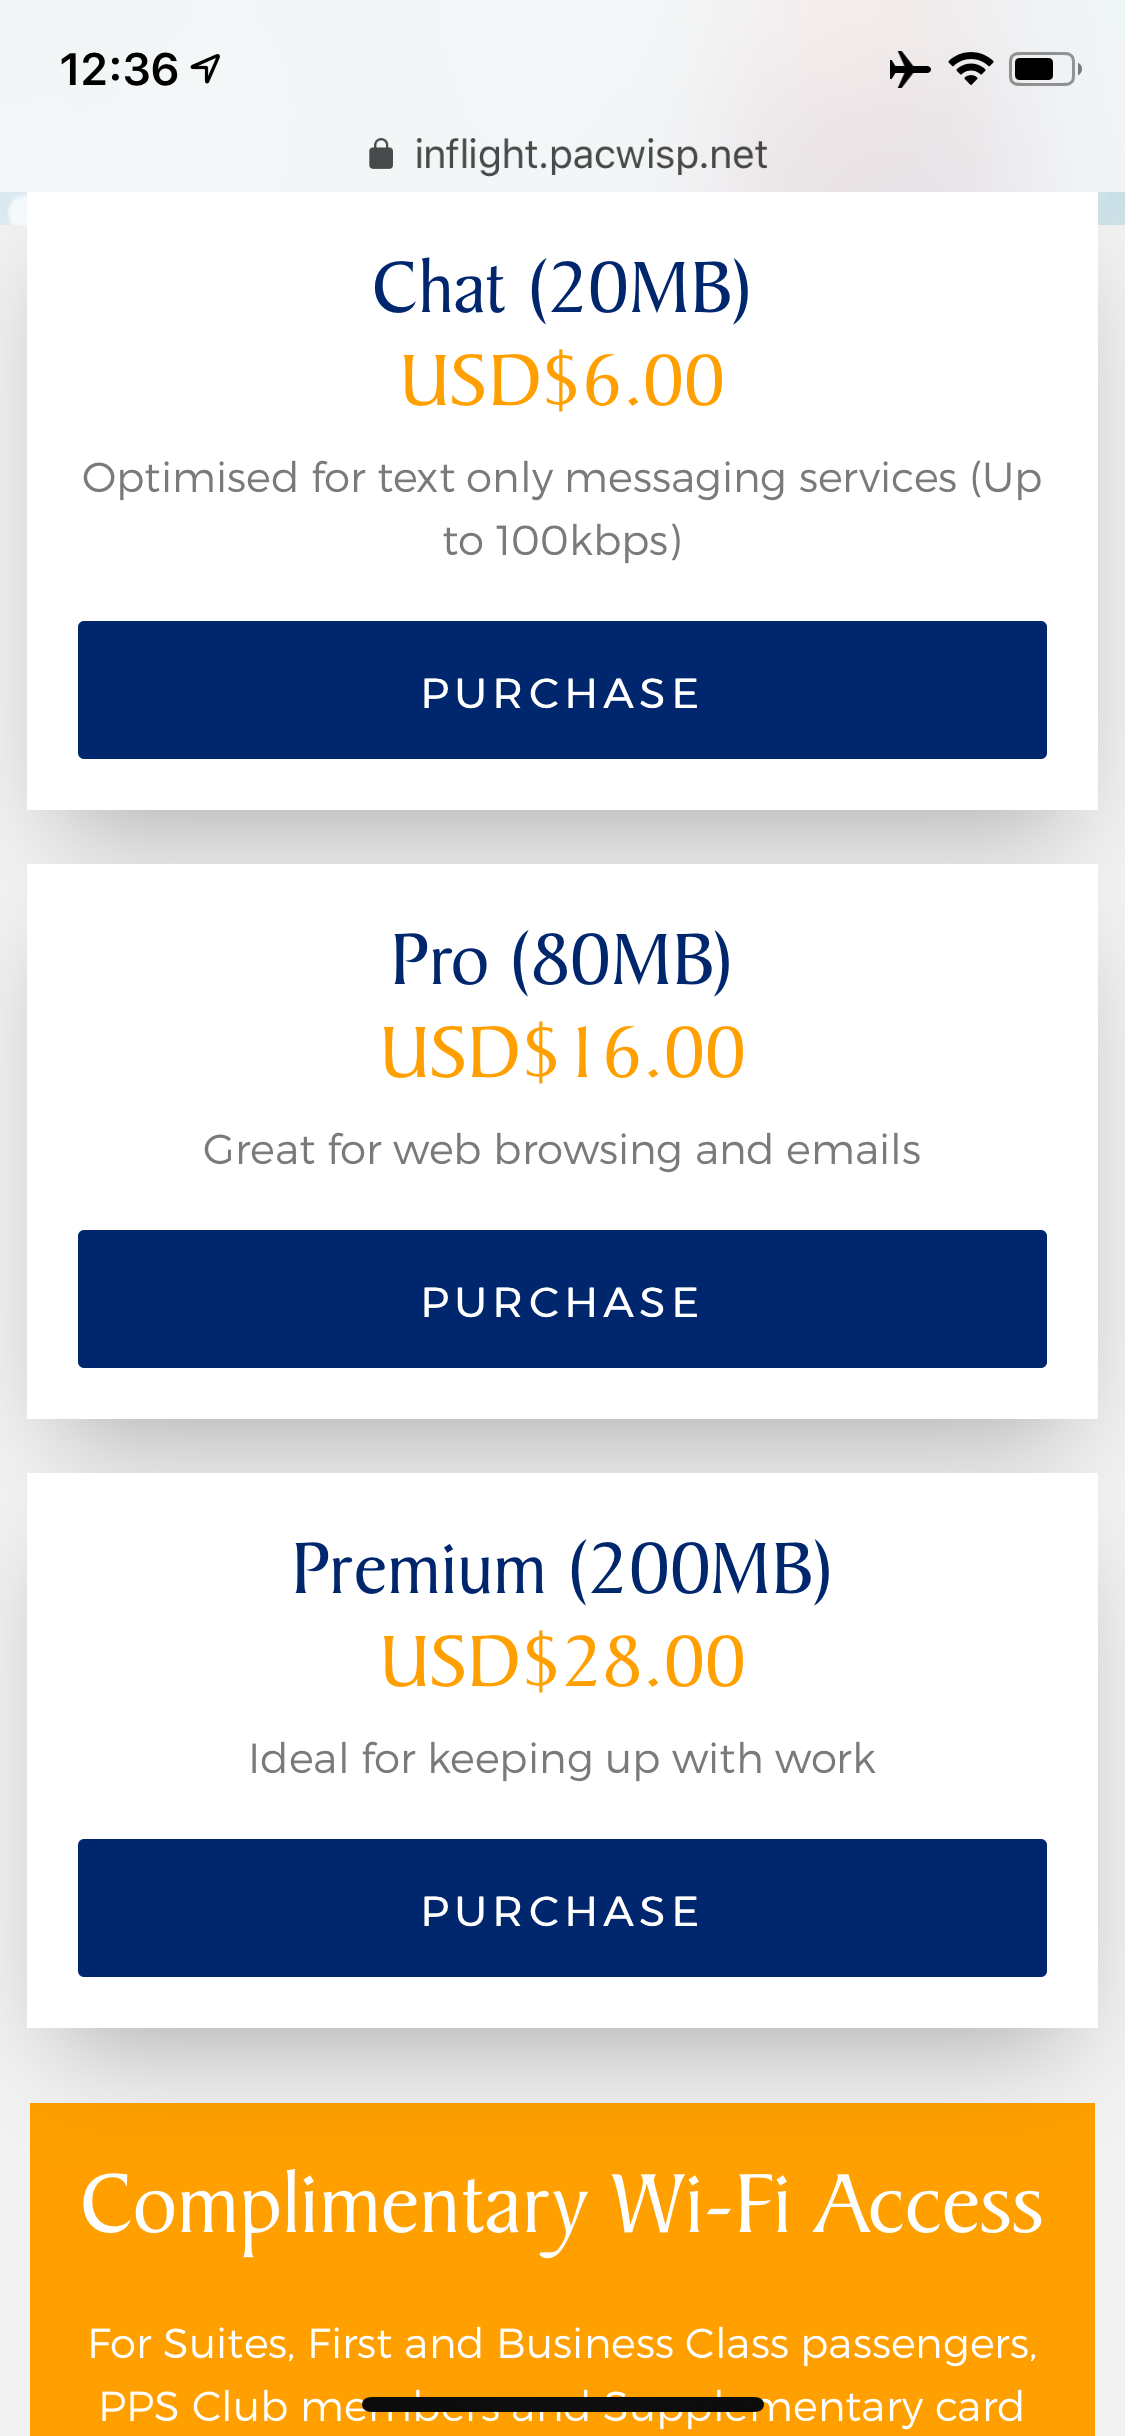 Singapore Airlines Inflight Wi-Fi Prices